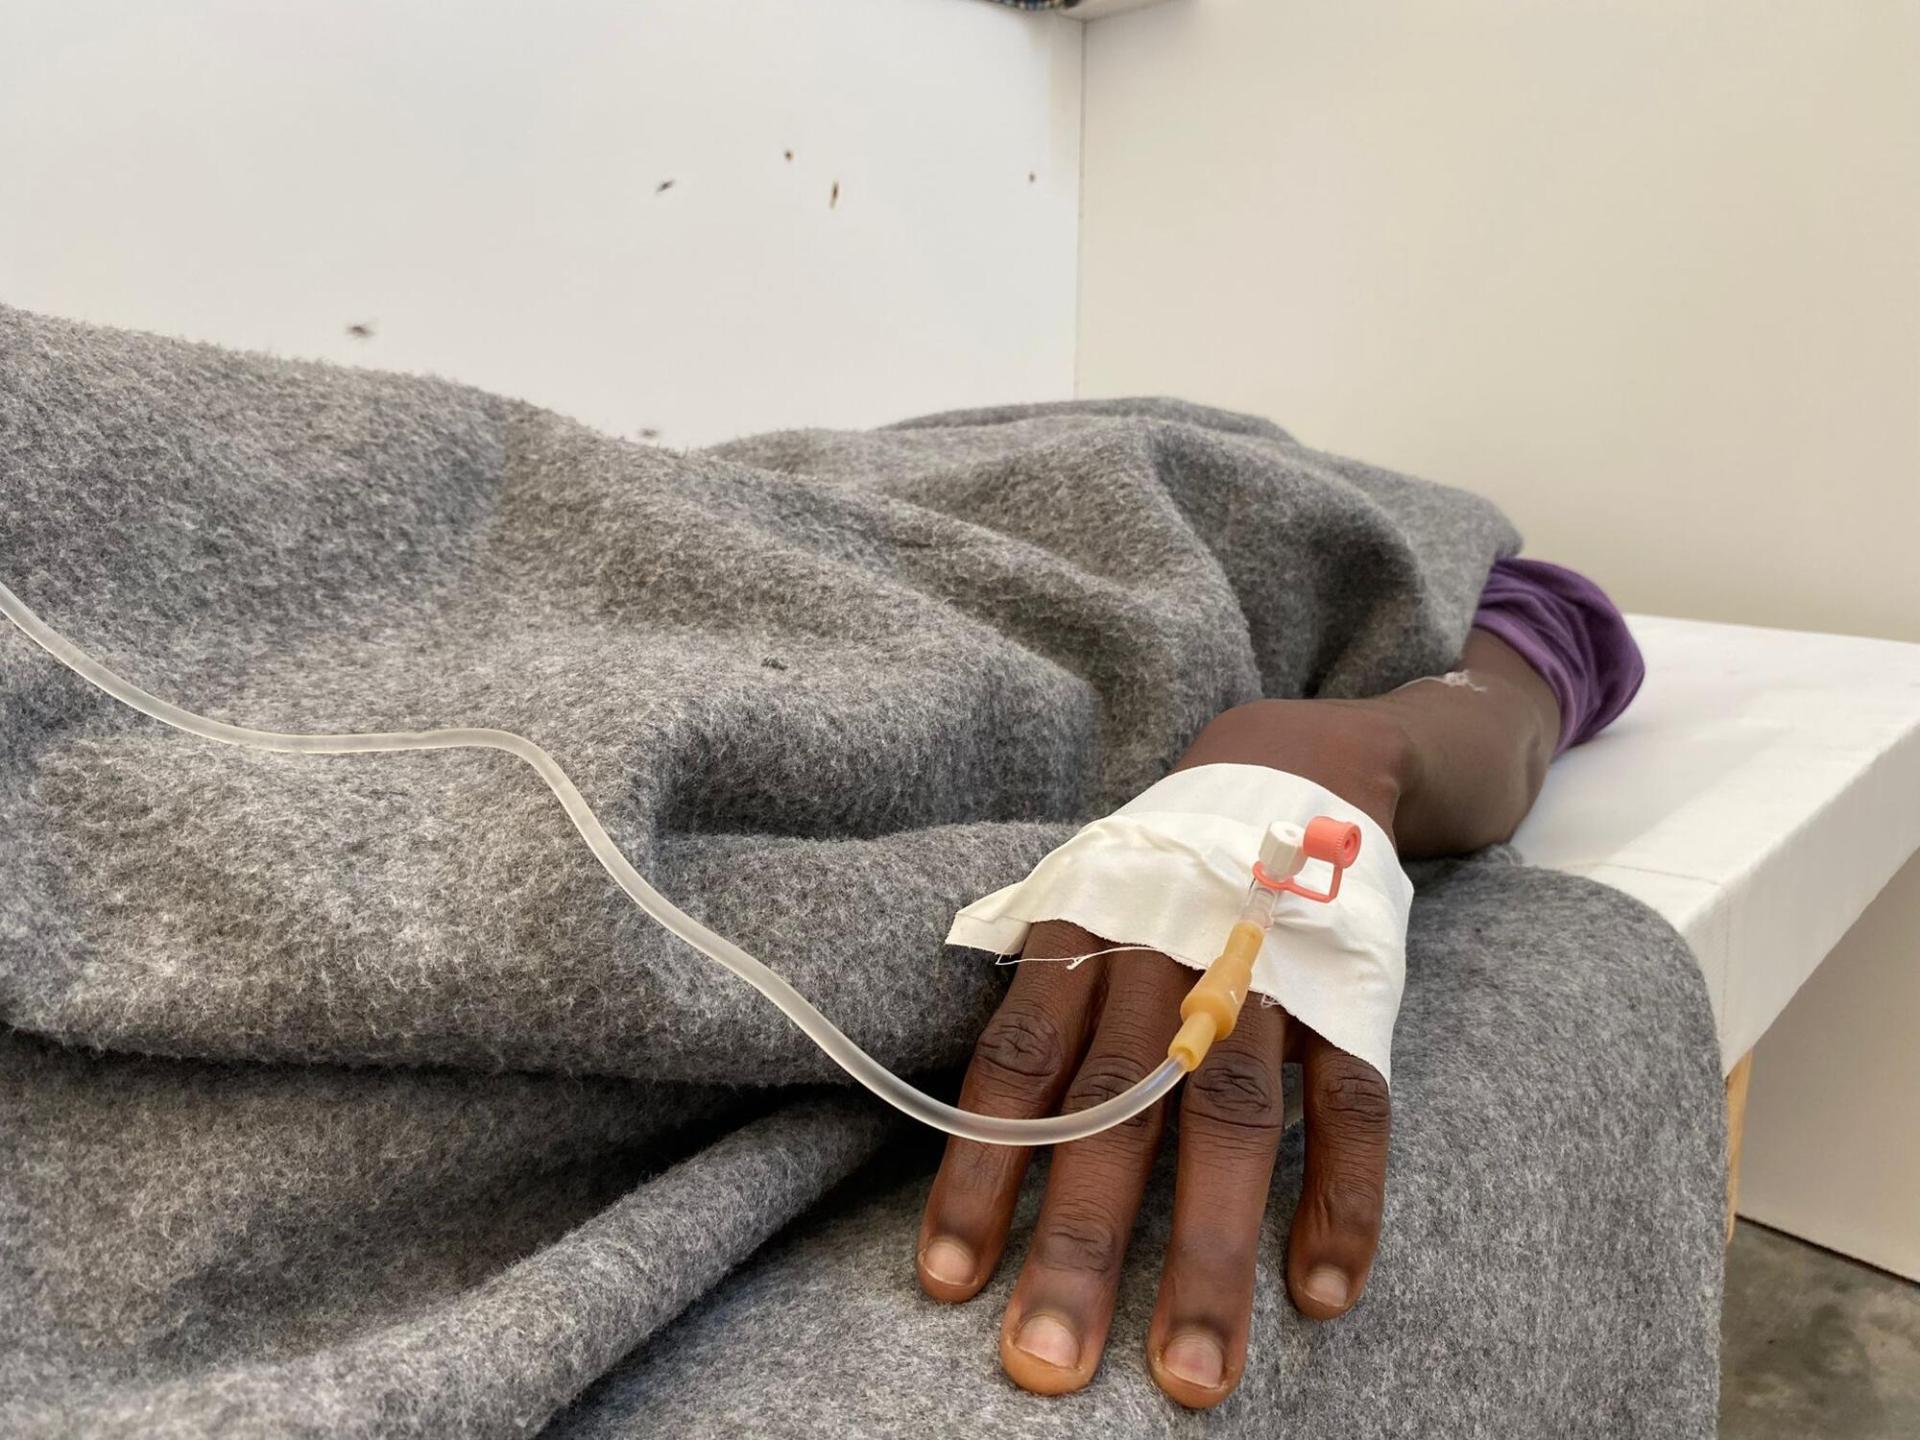 MSF respond to the worst cholera outbreak in Malawi in 20 years